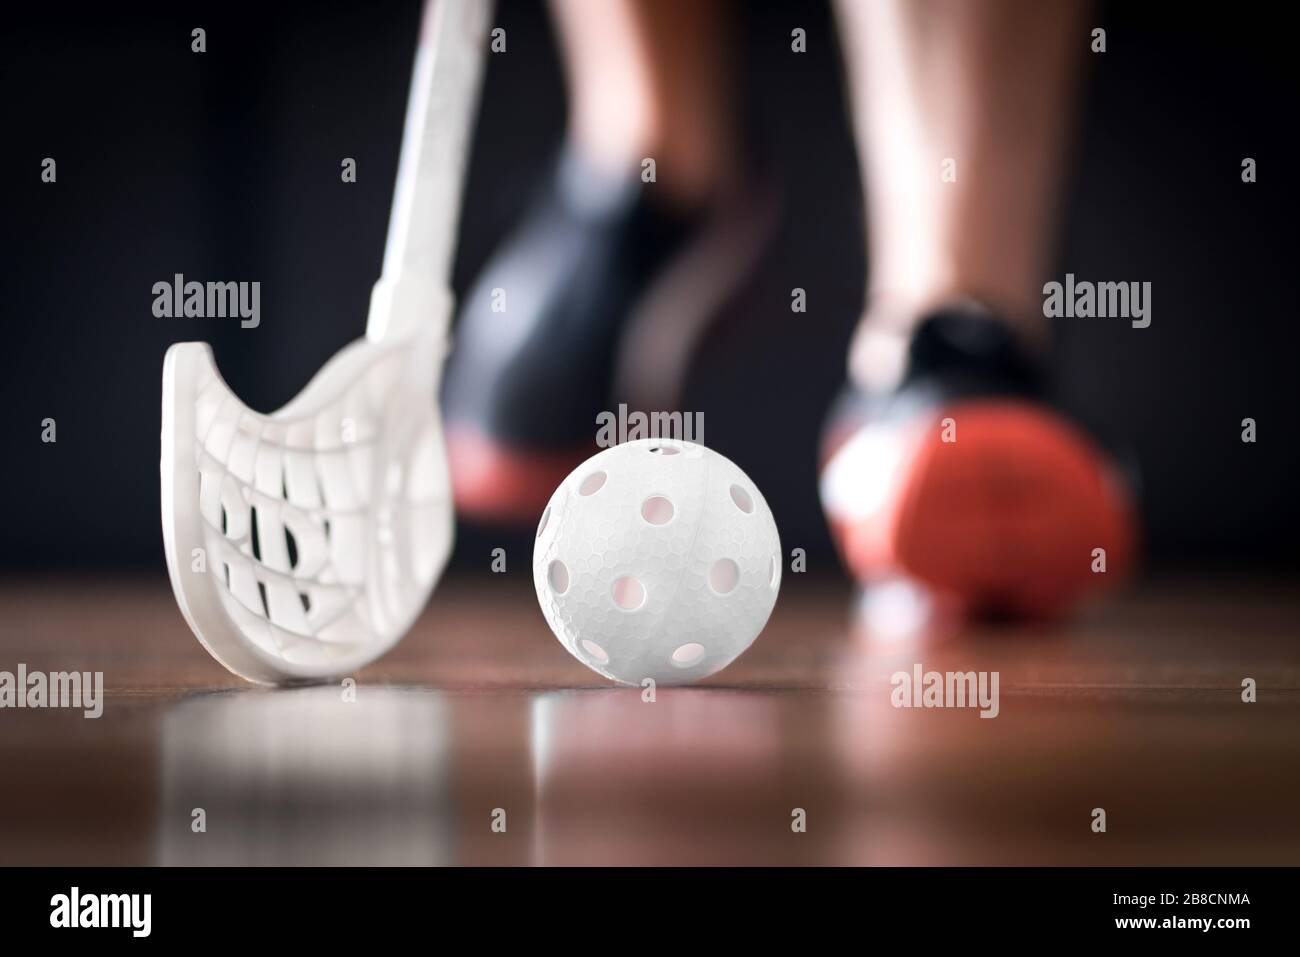 Floorball player running with ball and stick. Floor hockey concept. Stock Photo